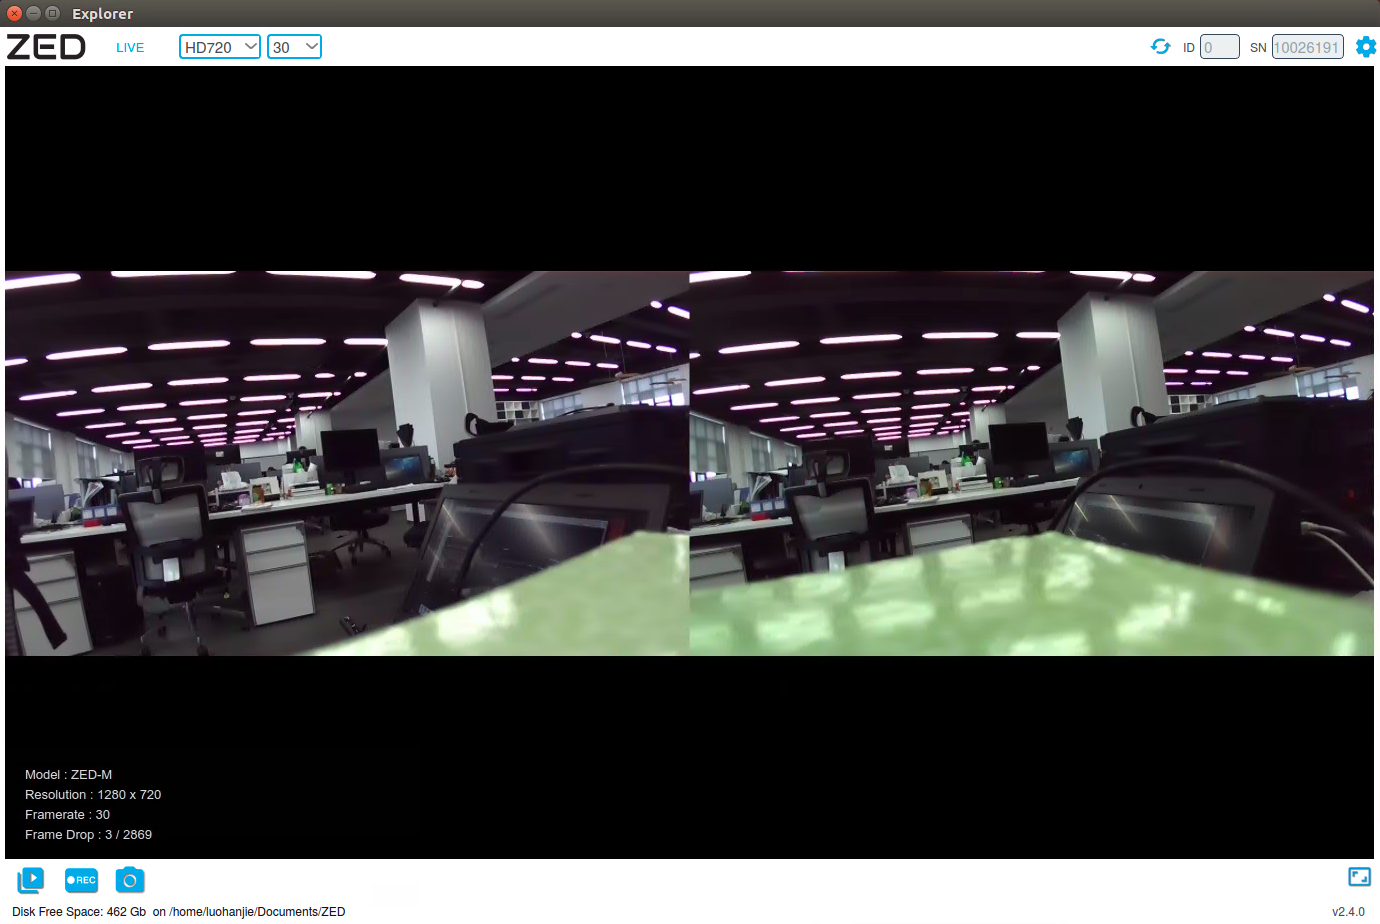 zed camera opencv implementation to process point clouds